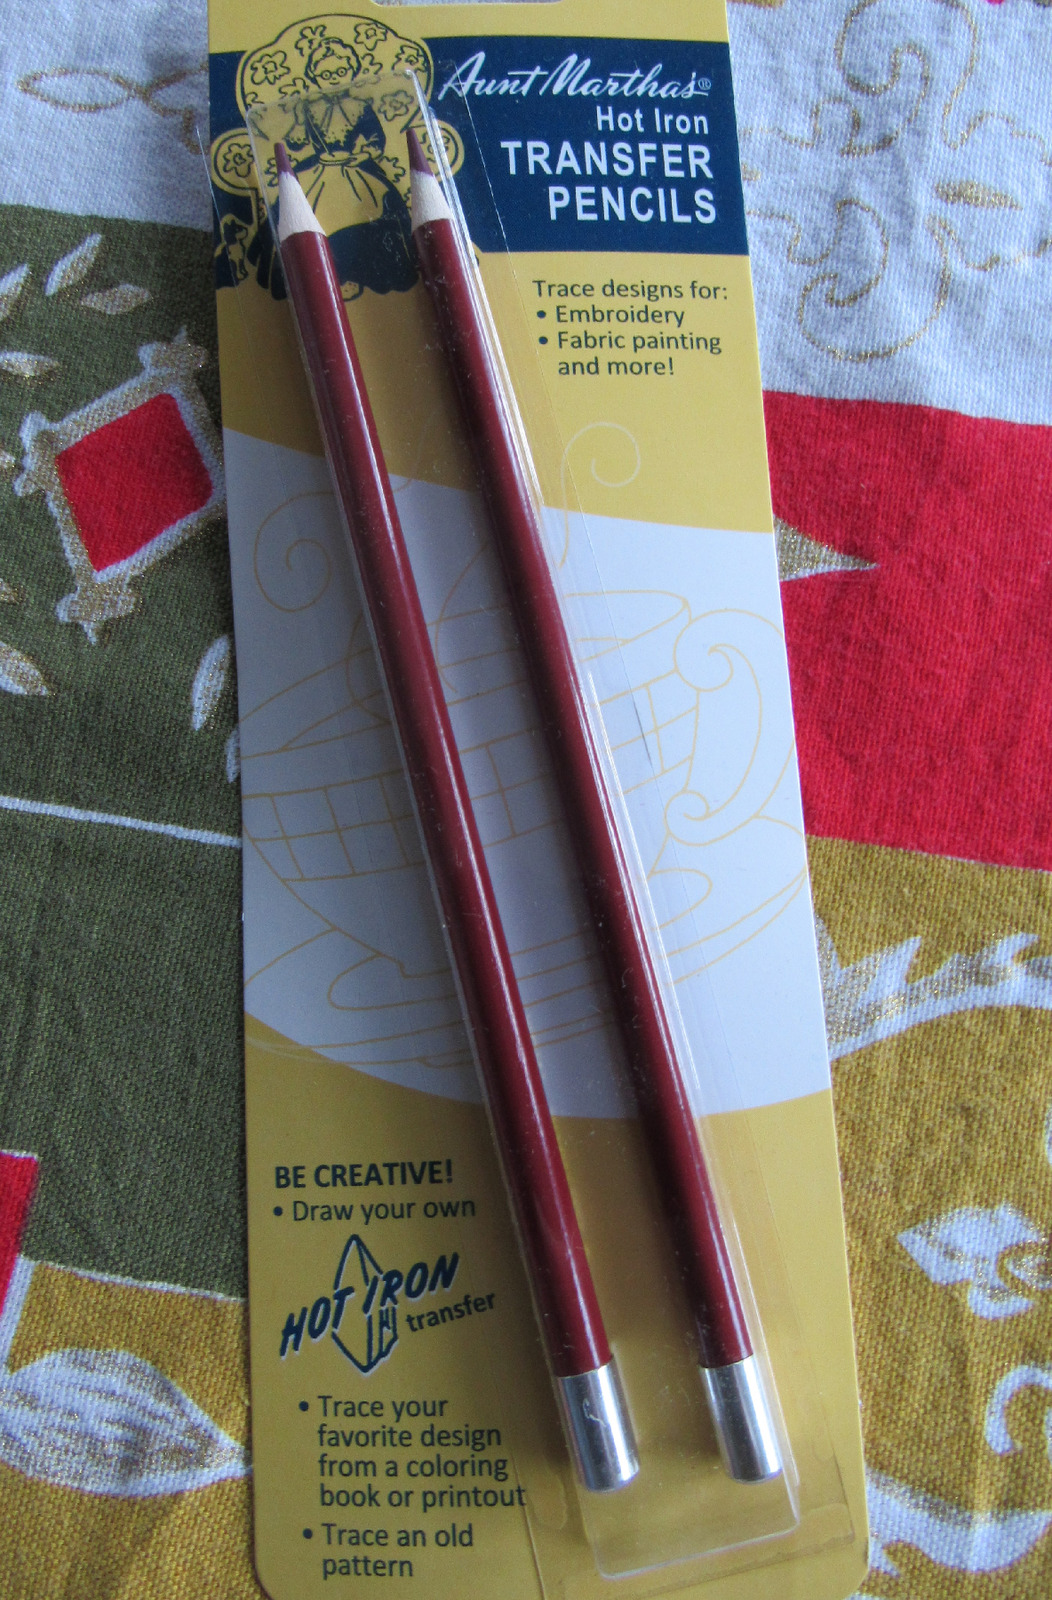 Aunt Martha's Red Transfer Pencils 2 Pk Embroidery Re-use Create Hot Iron Trace